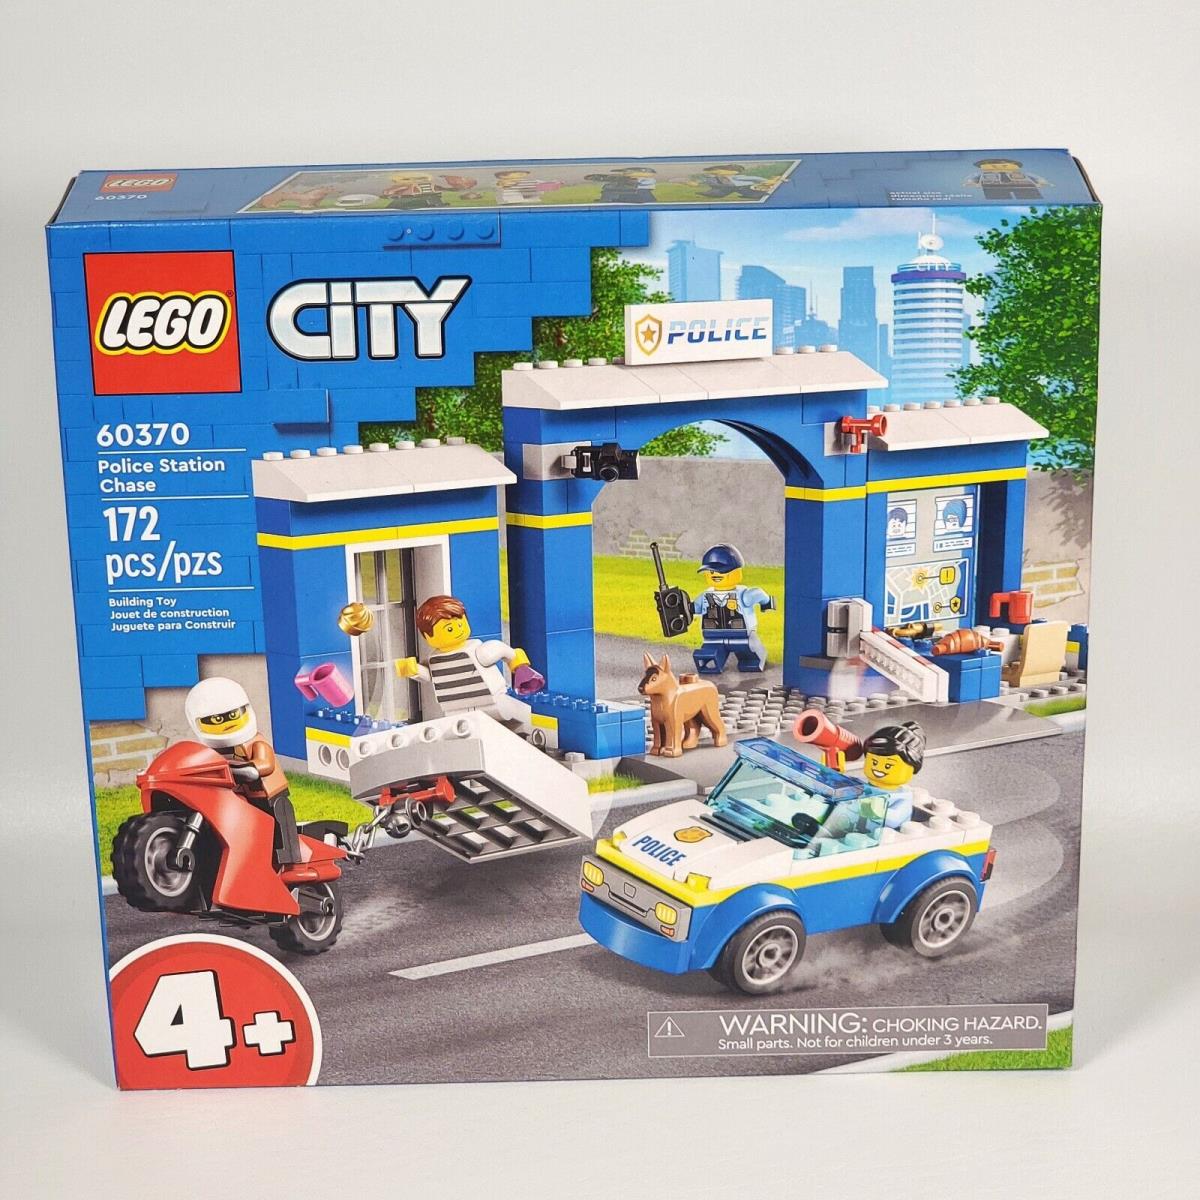 Lego City Police Station Chase 60370 Playset with Car Toy 4 Minifigures